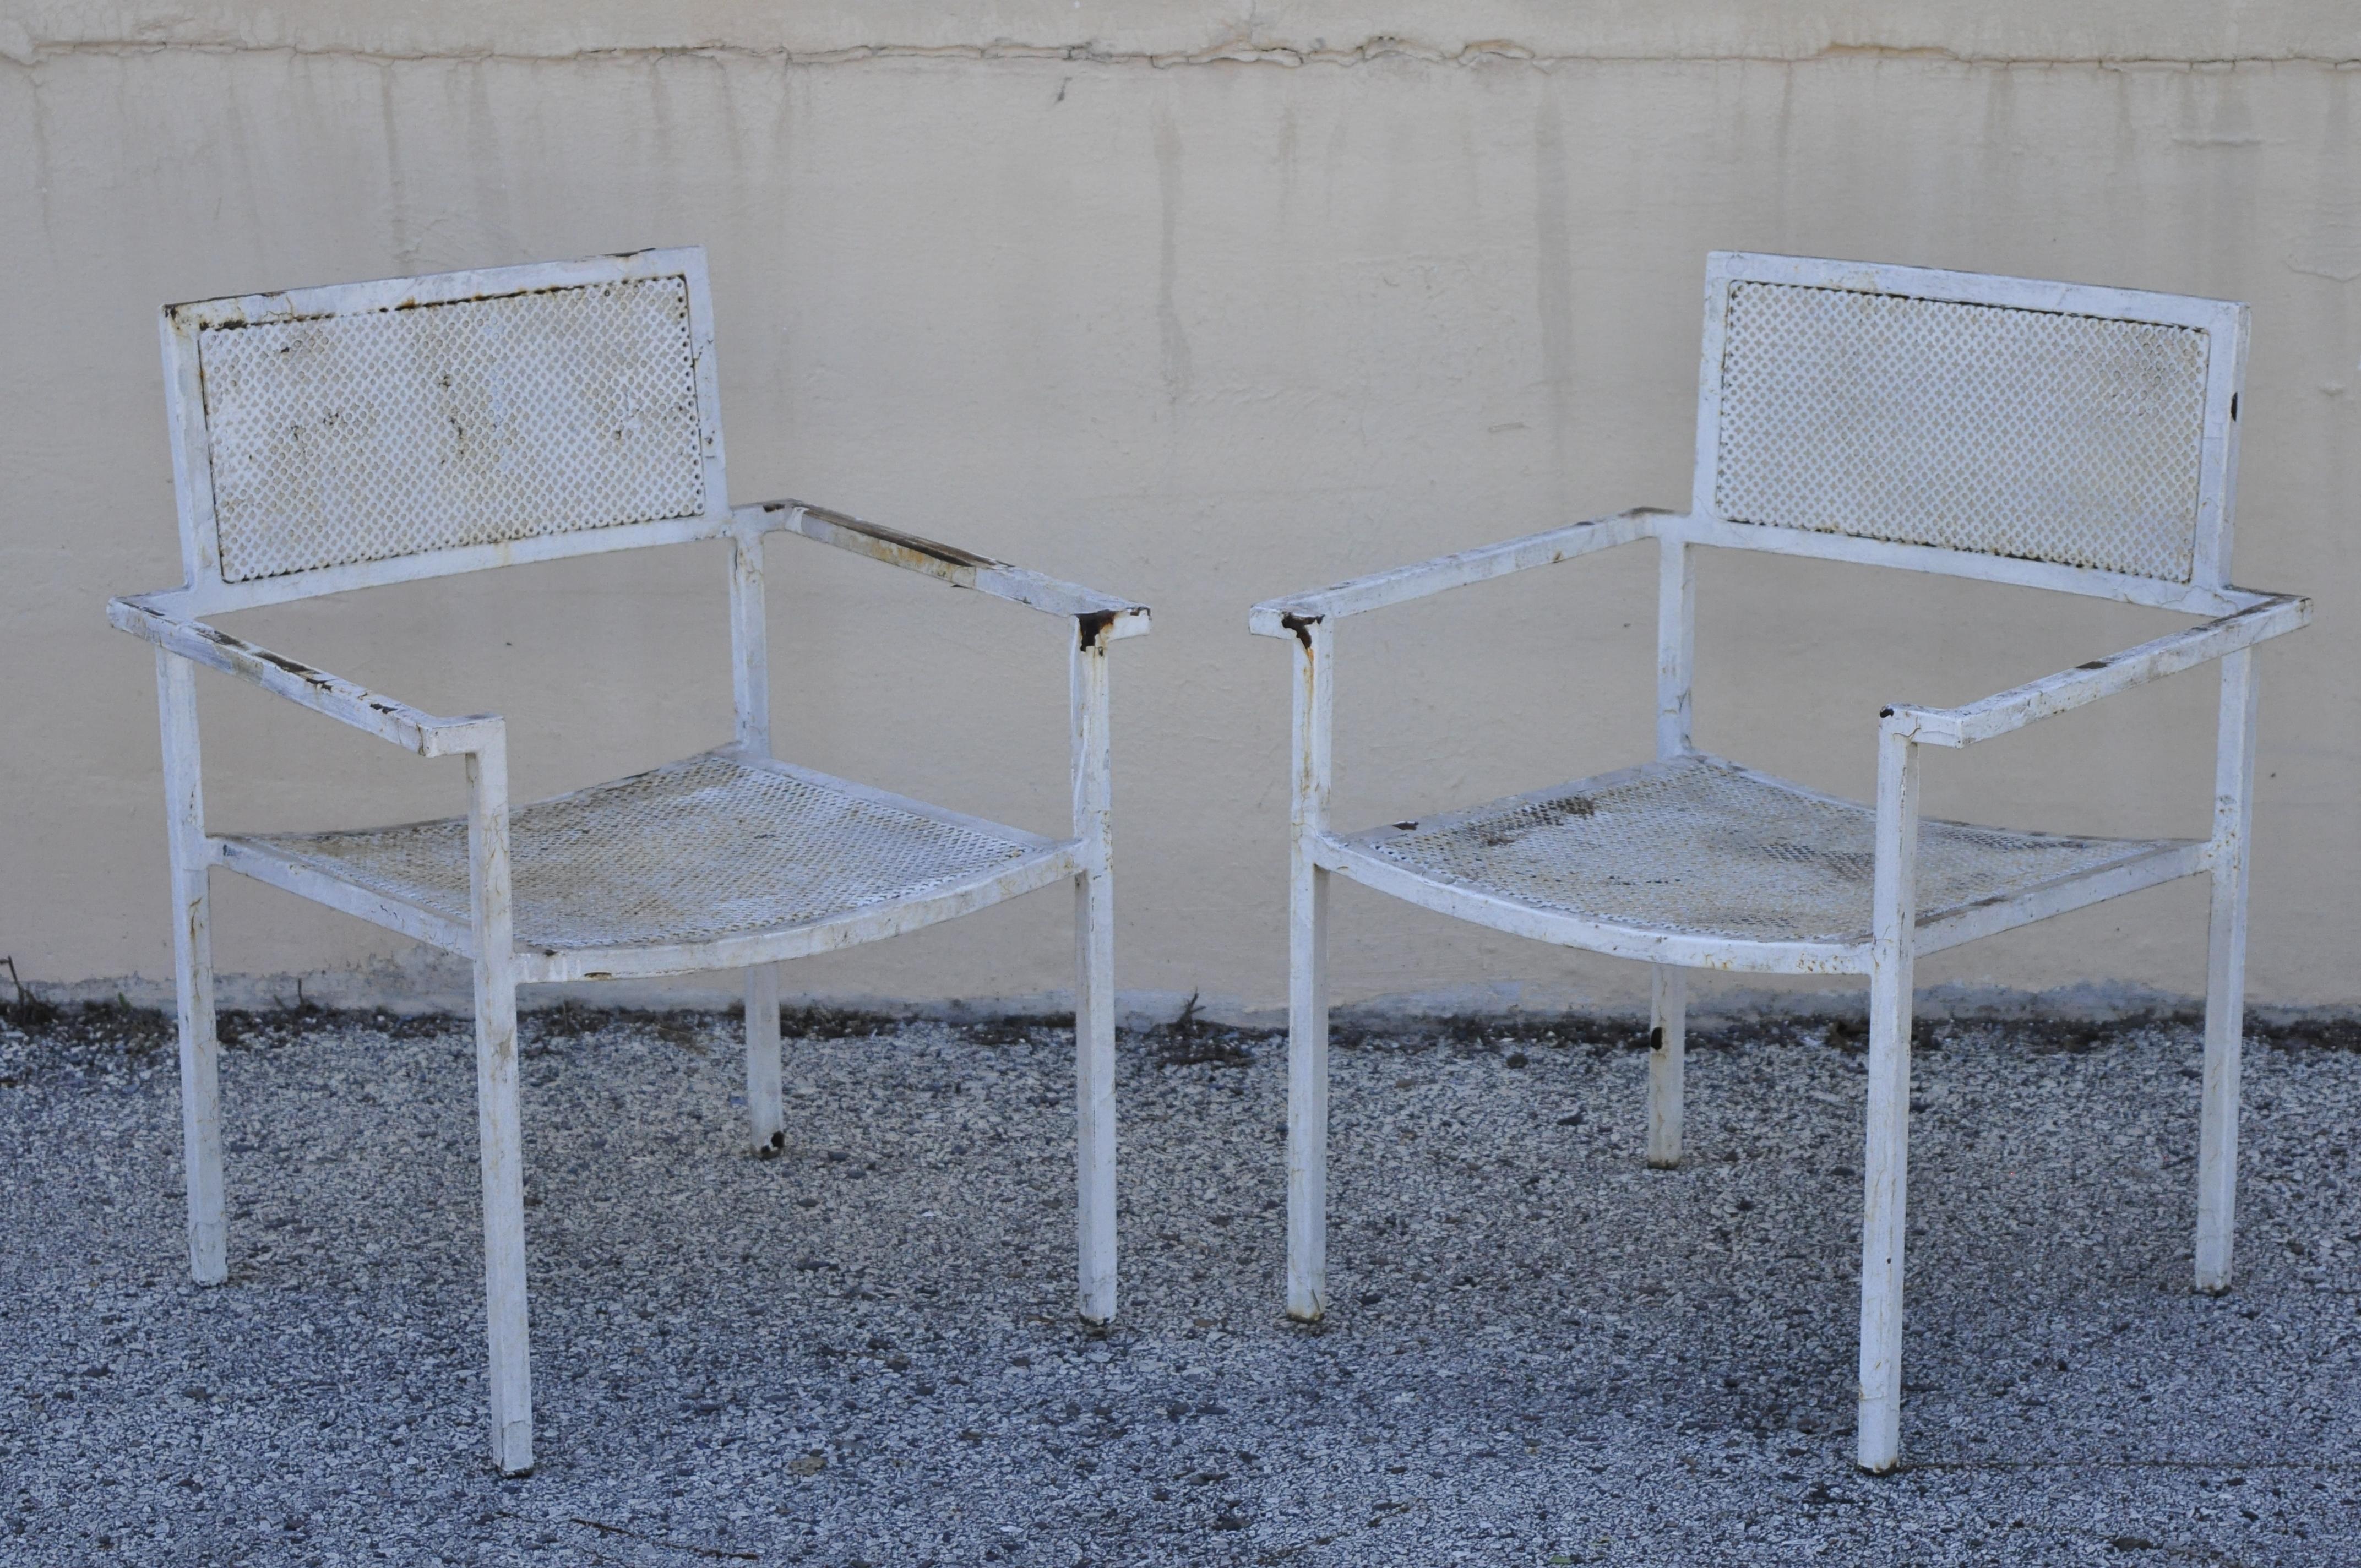 Vintage burgess England Mid-Century Modern iron metal patio set chairs loveseat. Listing includes (1) Loveseat, (2) armchairs, (2) side tables, perforated design, wrought iron construction, original label, clean modernist lines, quality English